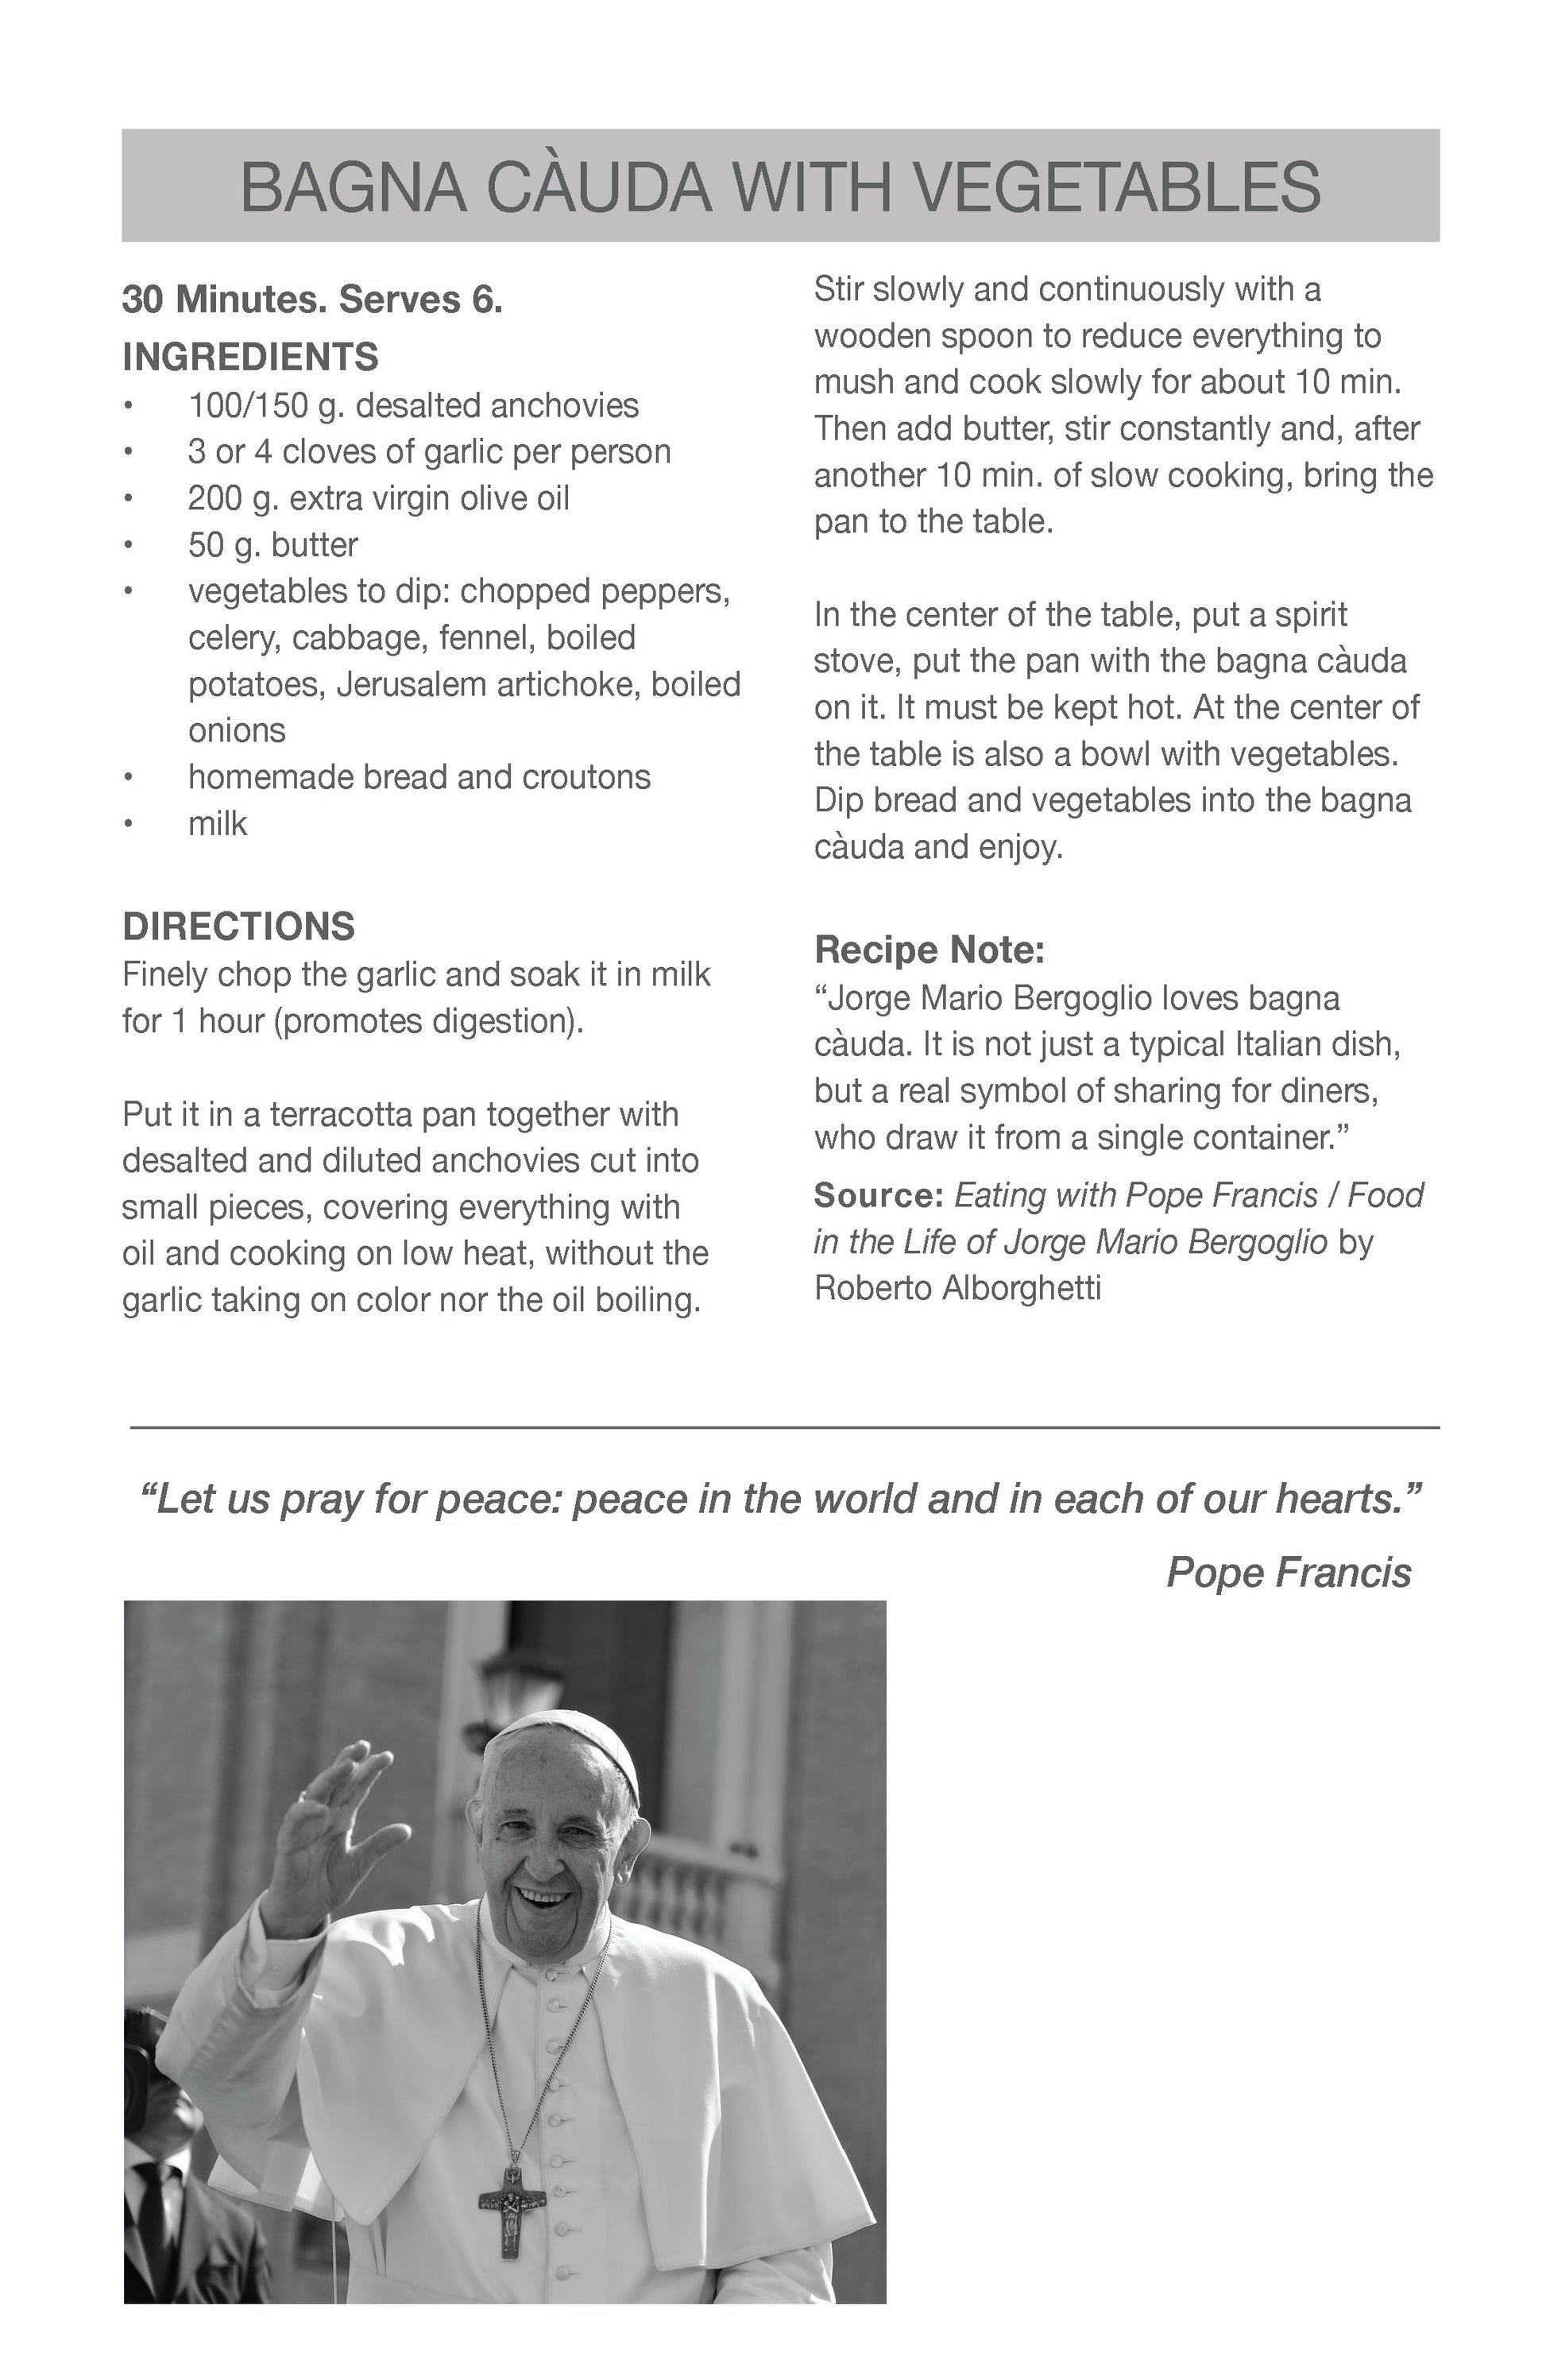 A page from the Rocky Point Rotary Cookbook with one of Pope Francis' favorite recipes Bagna Cauda with Vegetables. The page also features a quote about peace from Pope Francis.